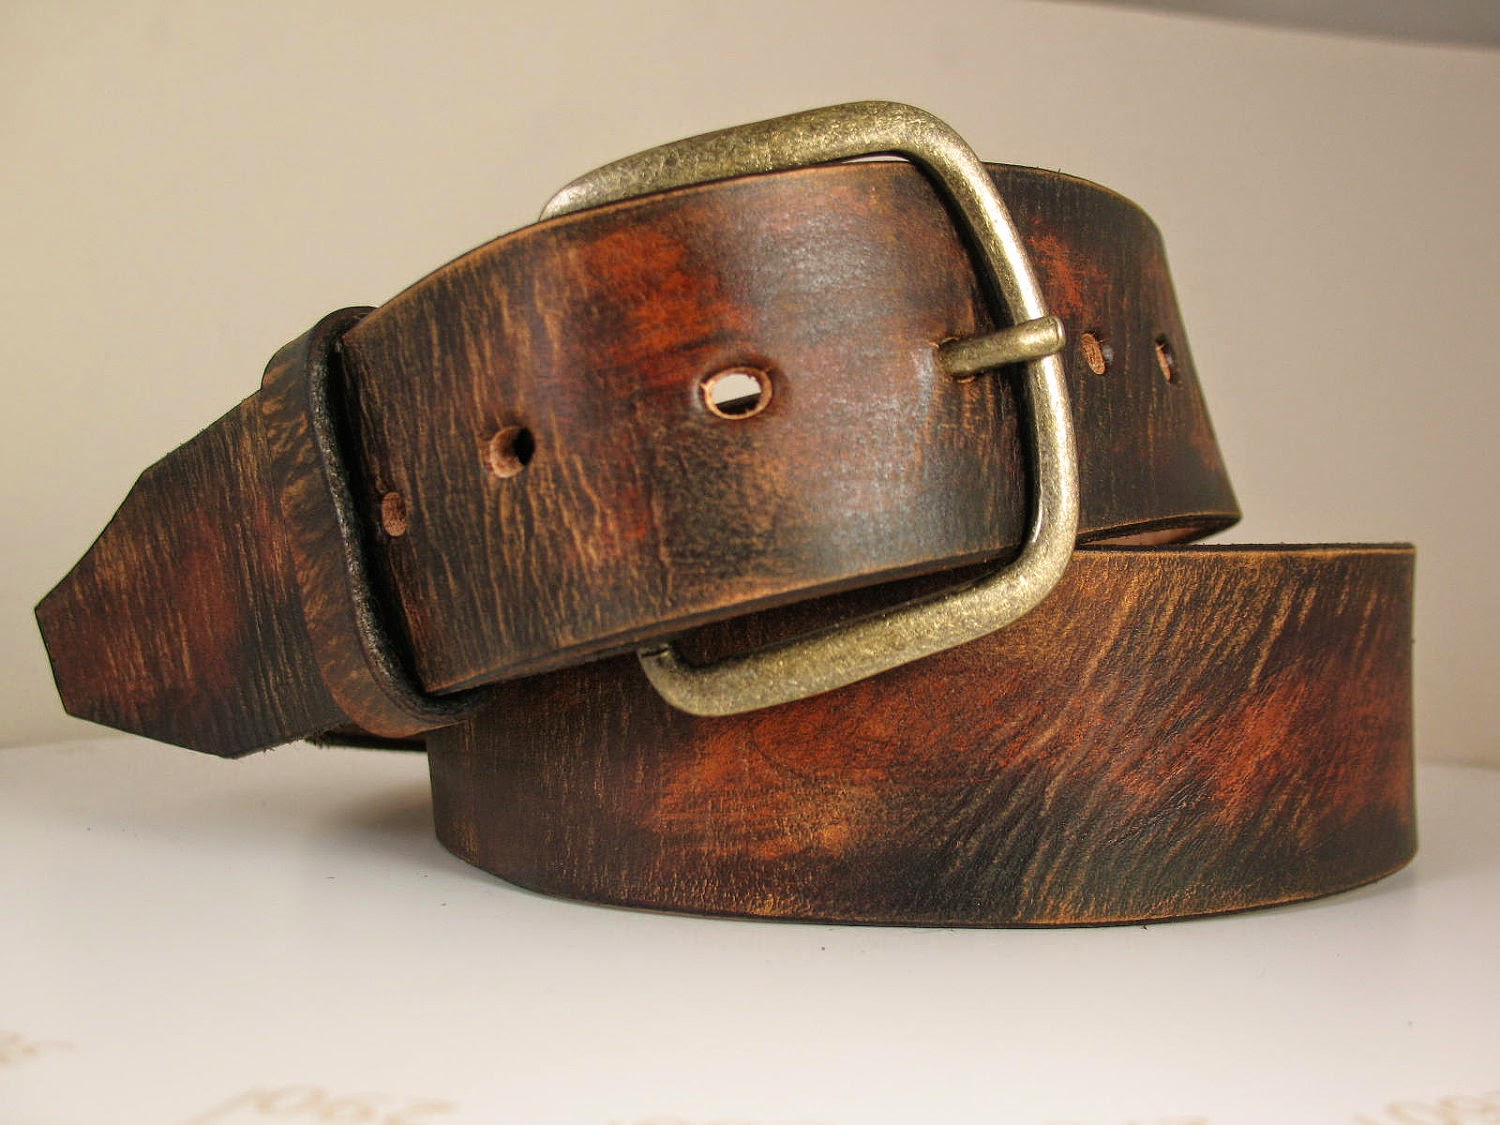 Pastor's Pen: Lessons from an old leather belt